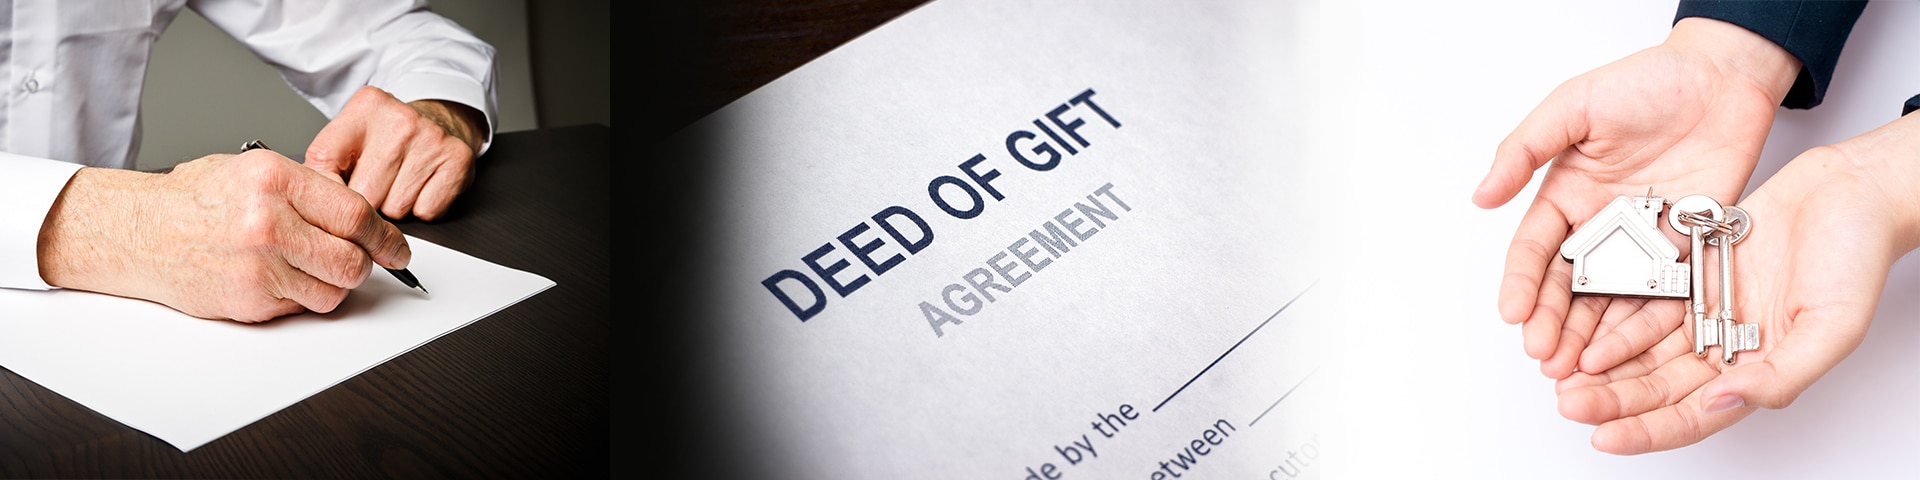 What is the process of transferring property through gift deed where the  donee and donor both are in blood relation?